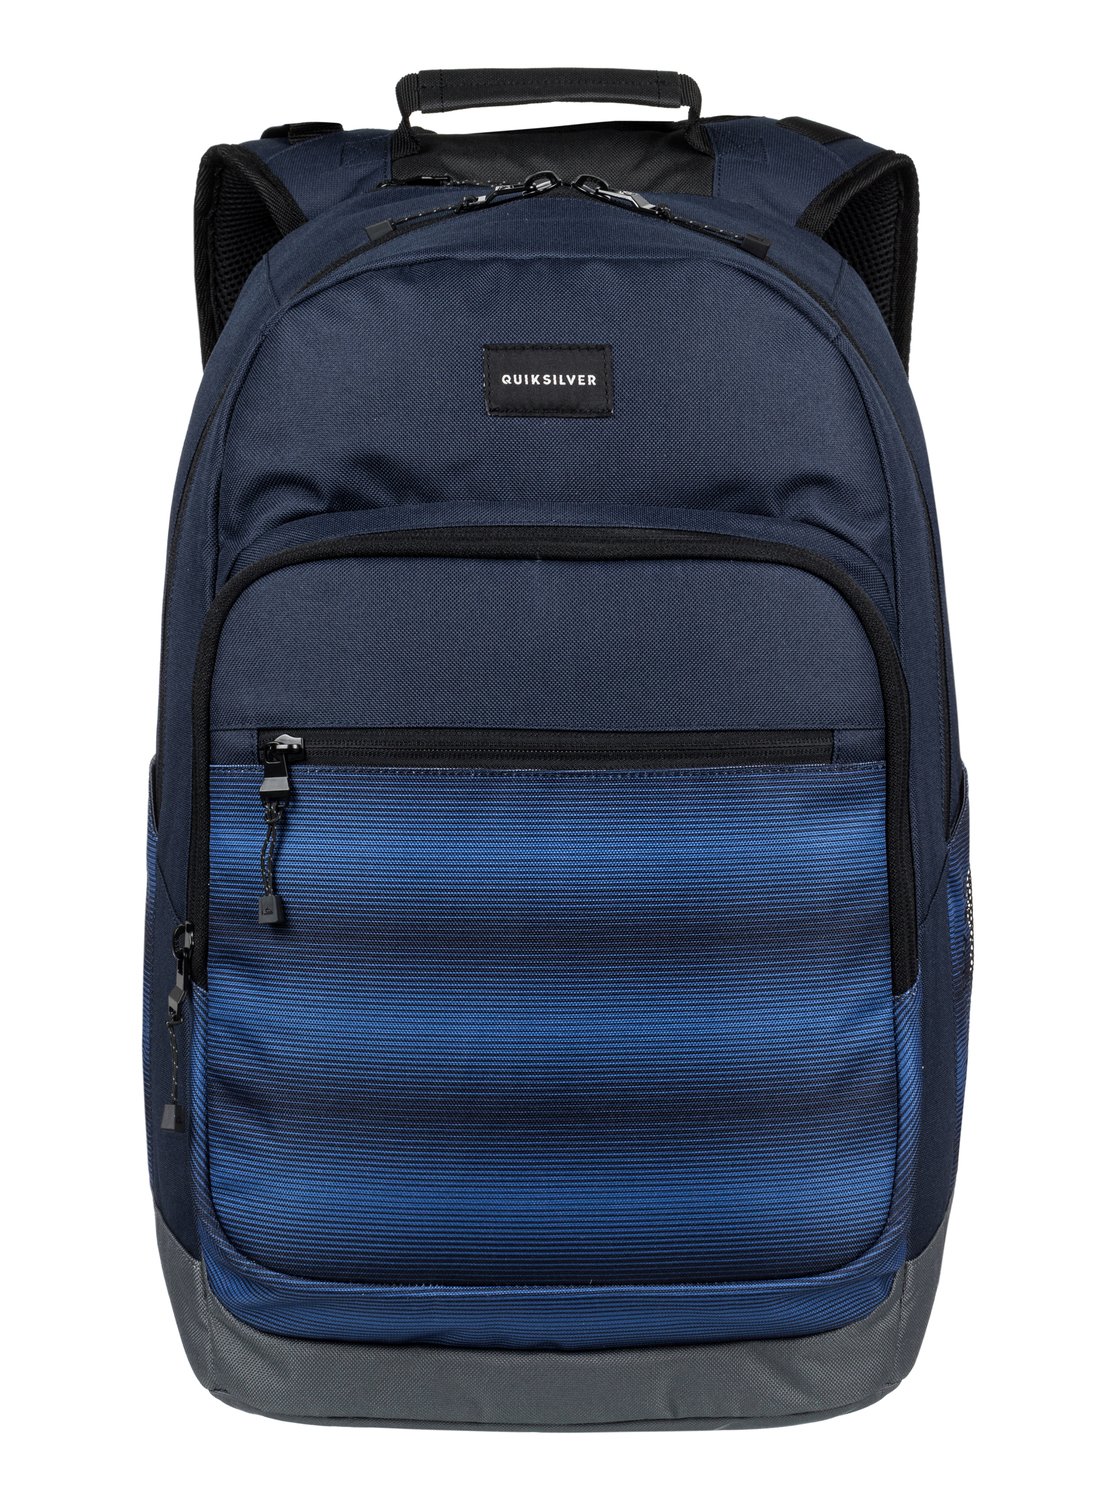 Quiksilver Schoolie Special Backpack, BYJ0-Navy, OS BYJ0-Navy OS